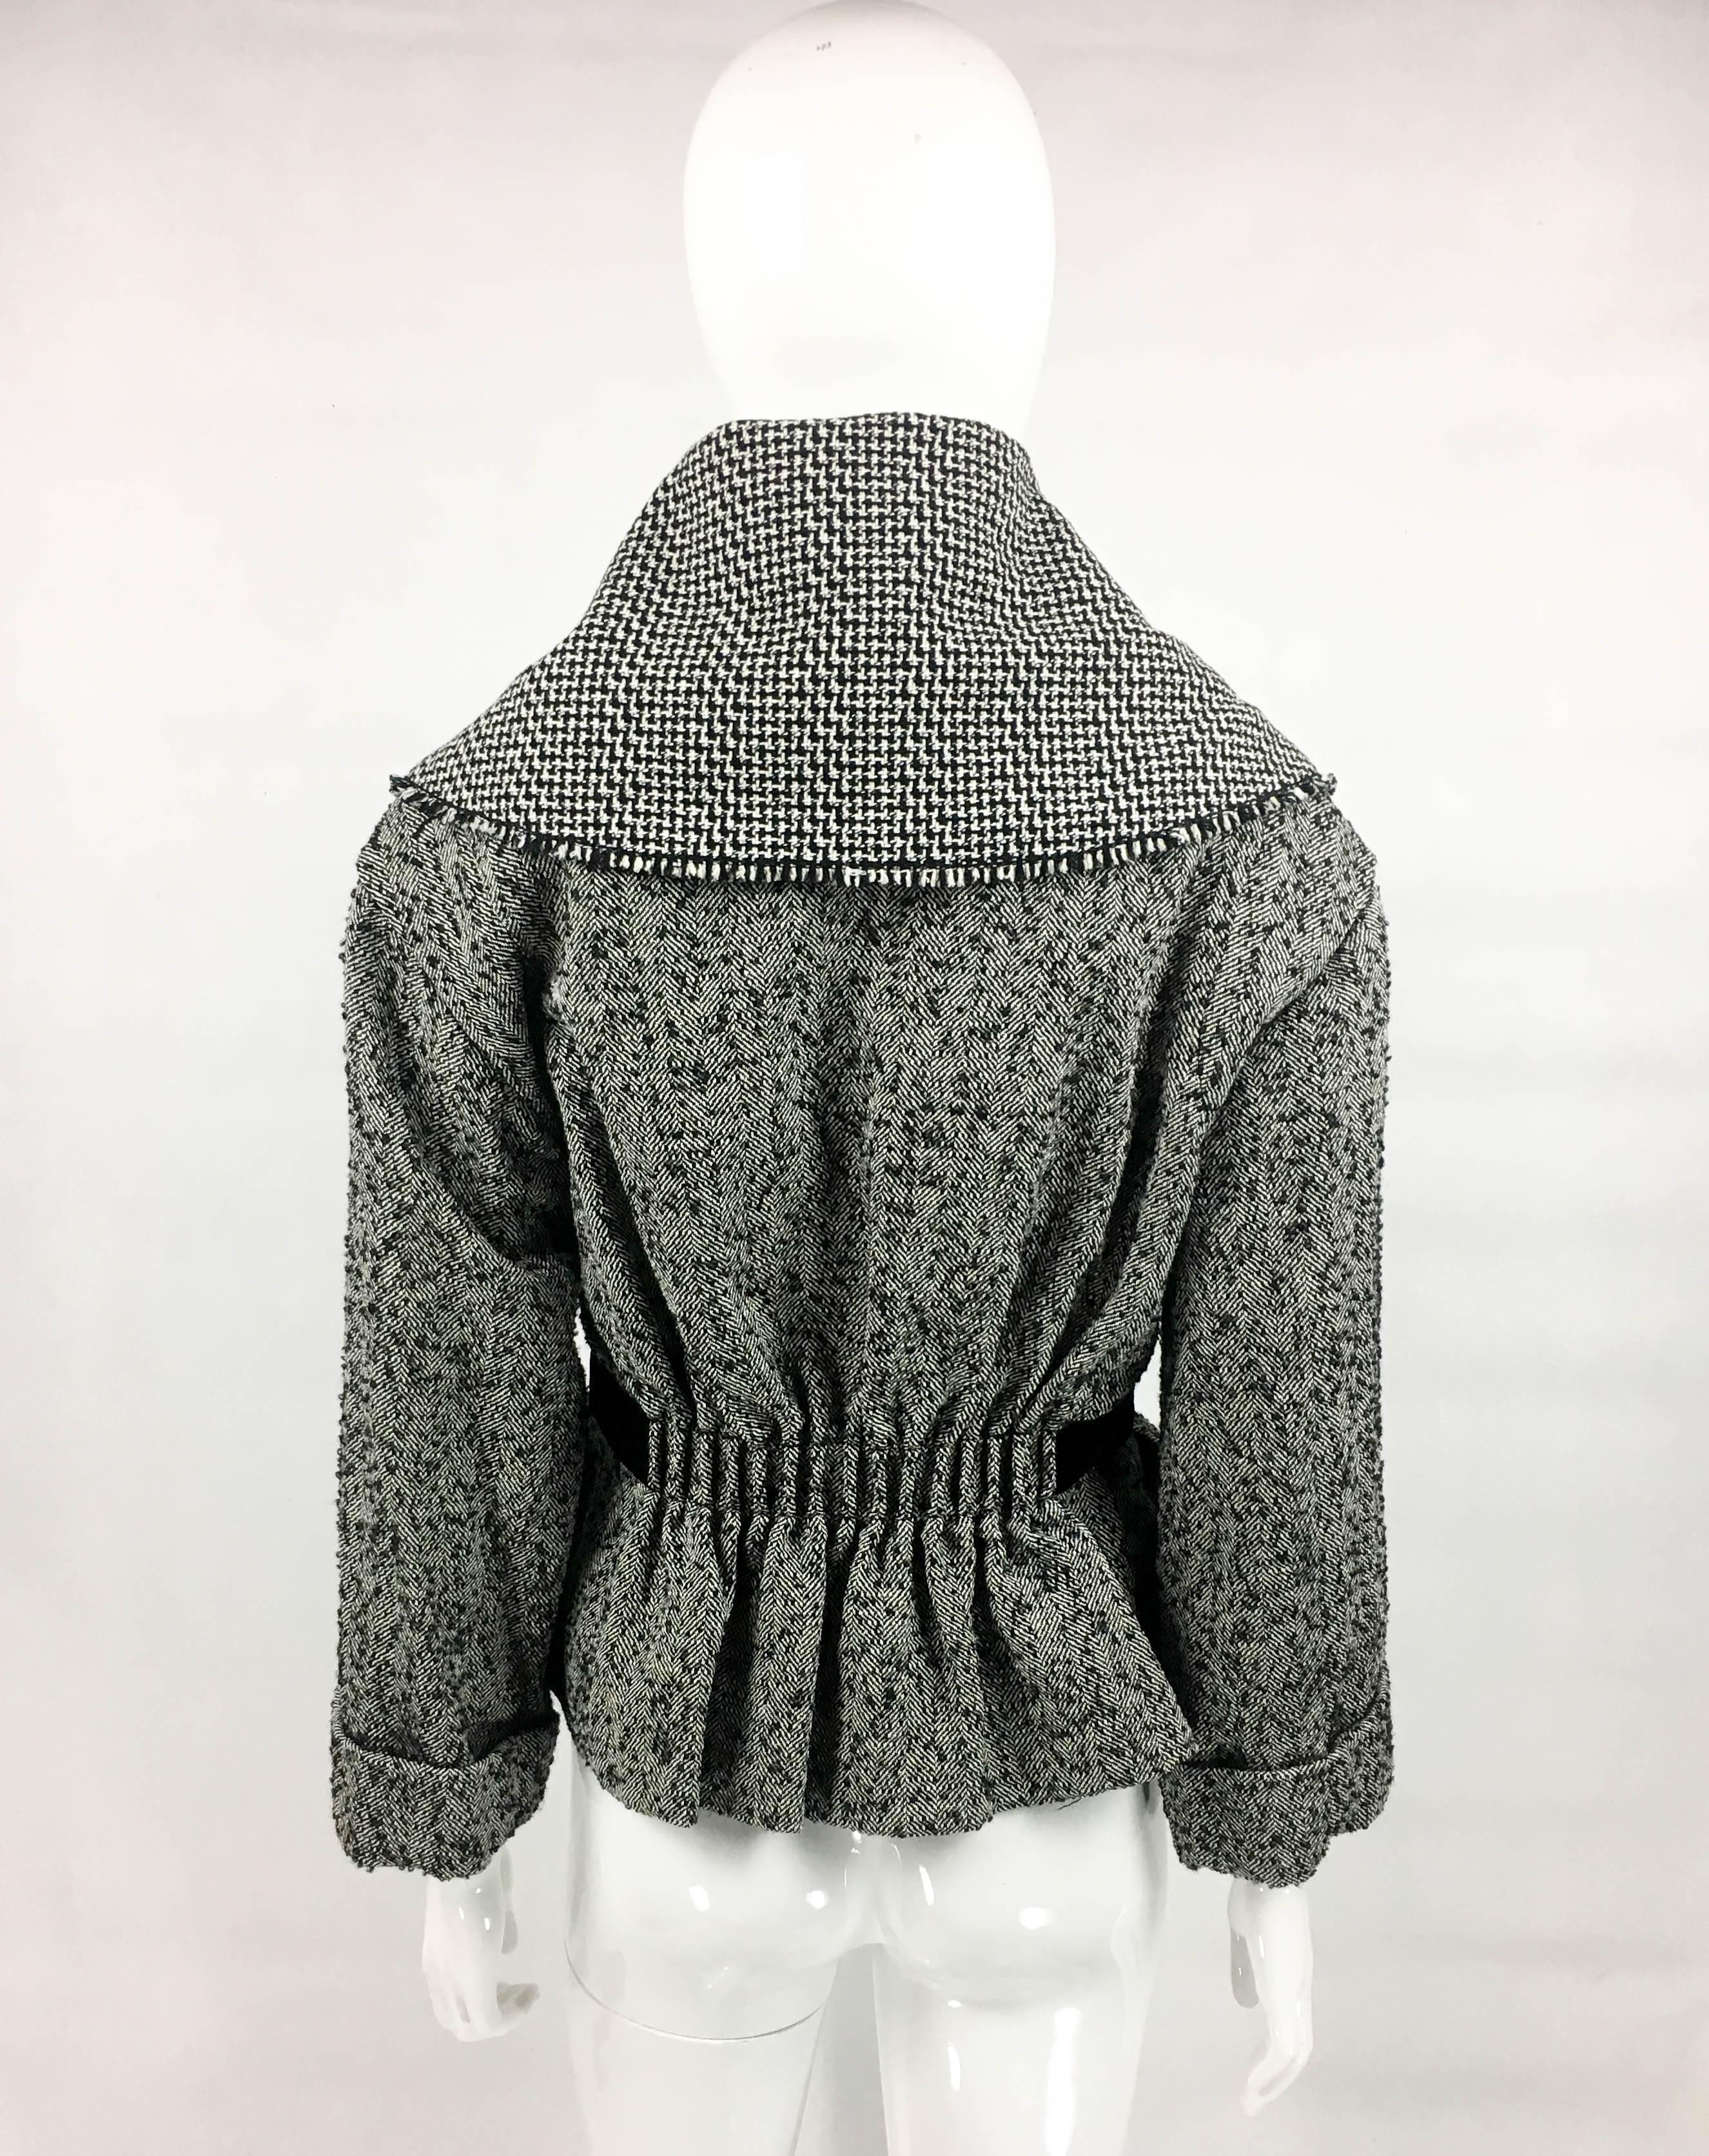 Louis Vuitton Black and White Tweed Jacket With Dramatic Collar - 21st Century 4